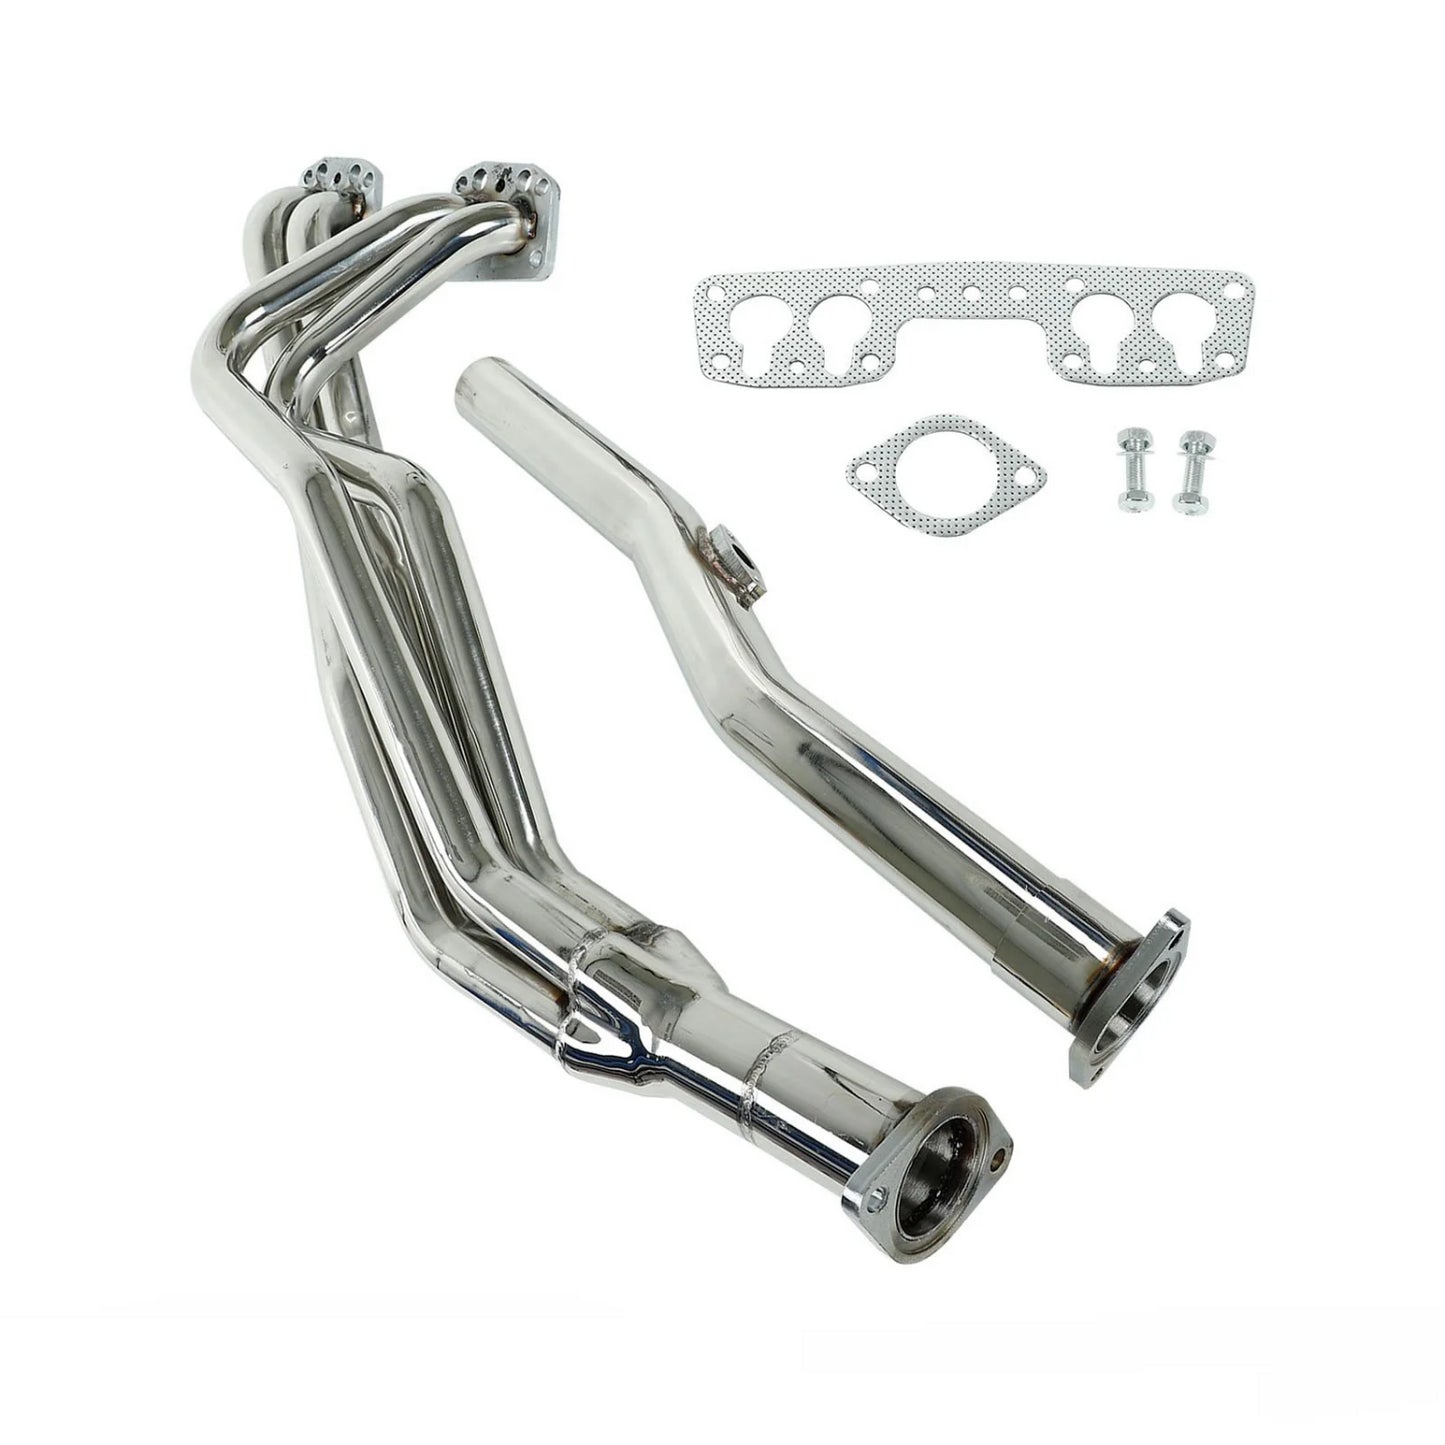 Exhaust Manifold Header for 2.2L Toyota Celica Pickup Hilux 1975-1980